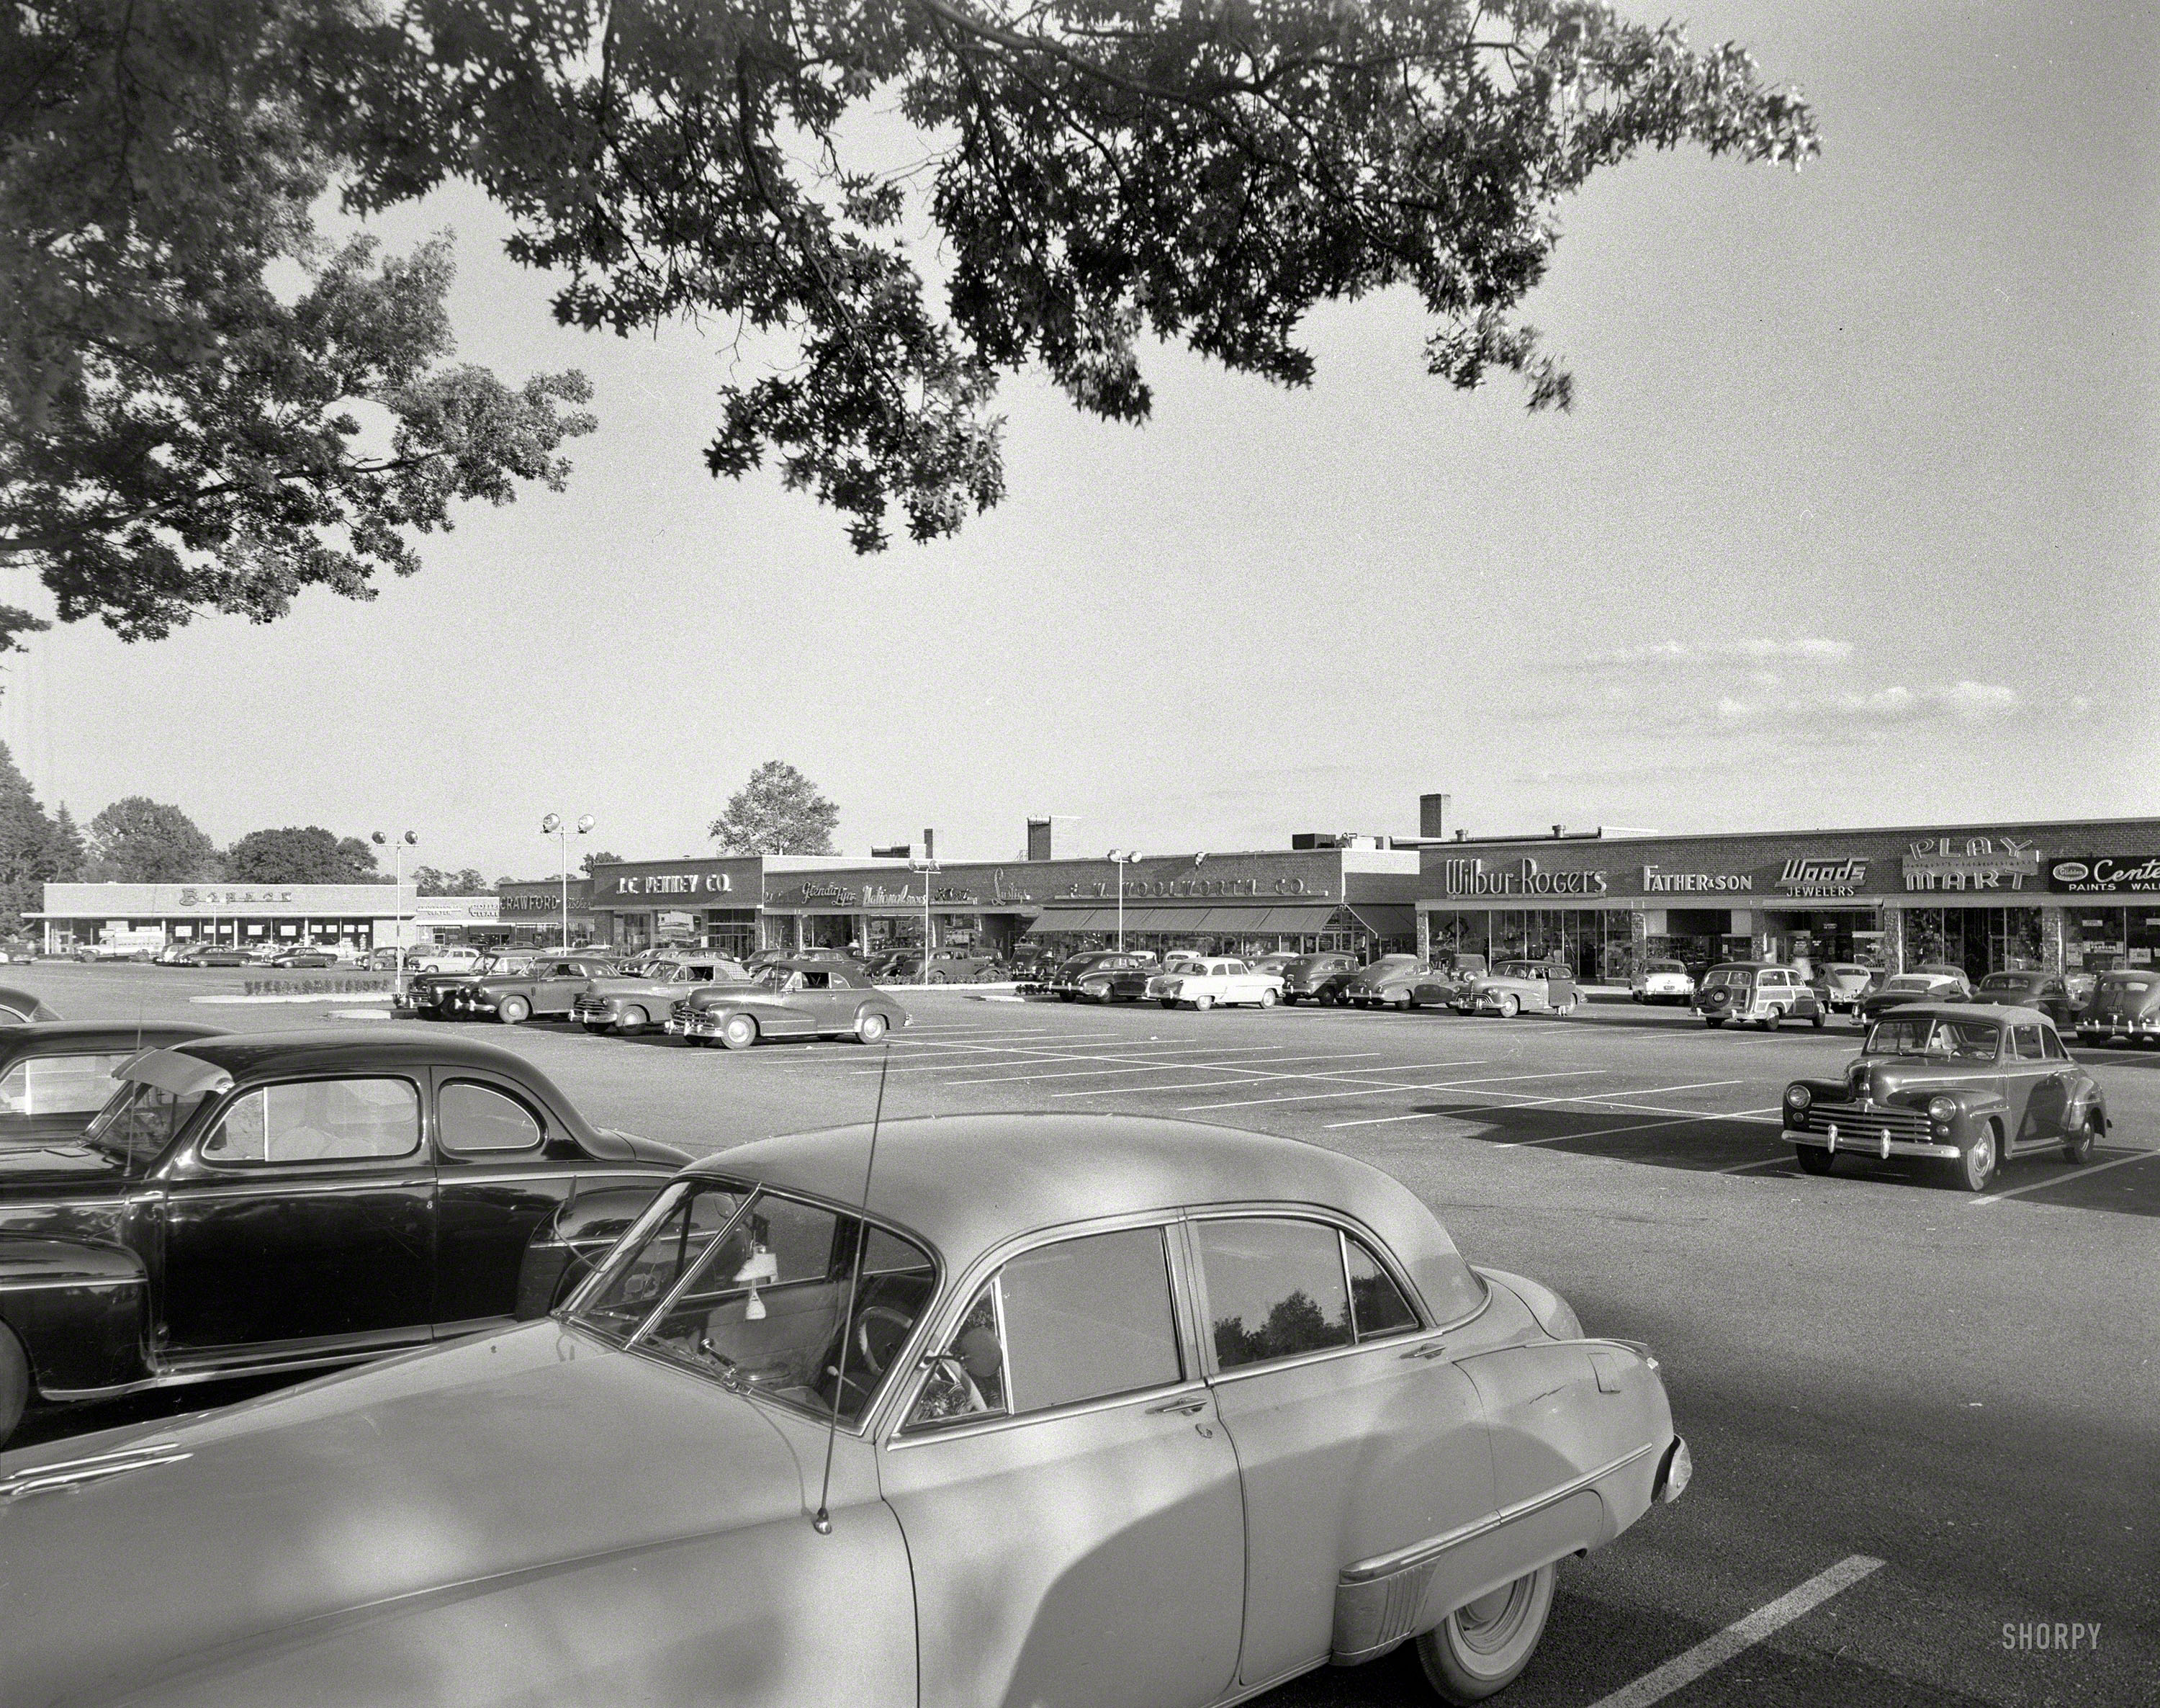 Sept. 27, 1954. Smithtown, New York. "Smithtown Shopping Center. General view." Meet you at Play Mart in an hour. Gottscho-Schleisner photo. View full size.